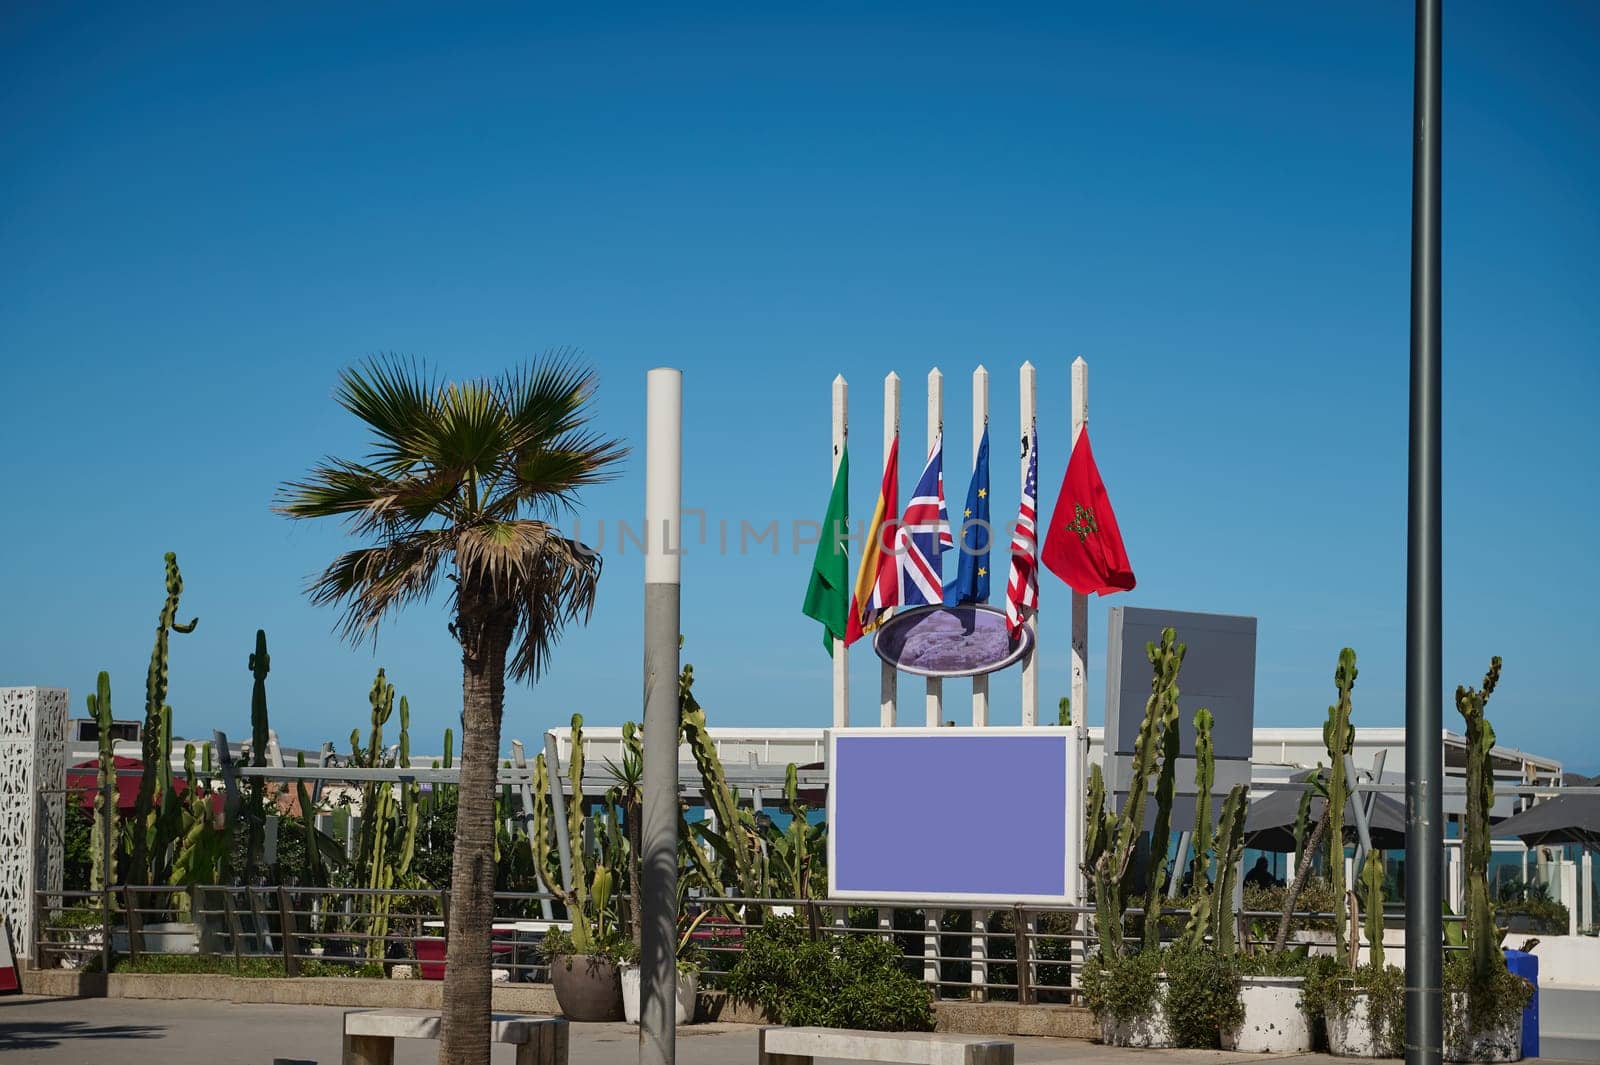 Background with flags of different countries on the promenade, over blue sky background by artgf